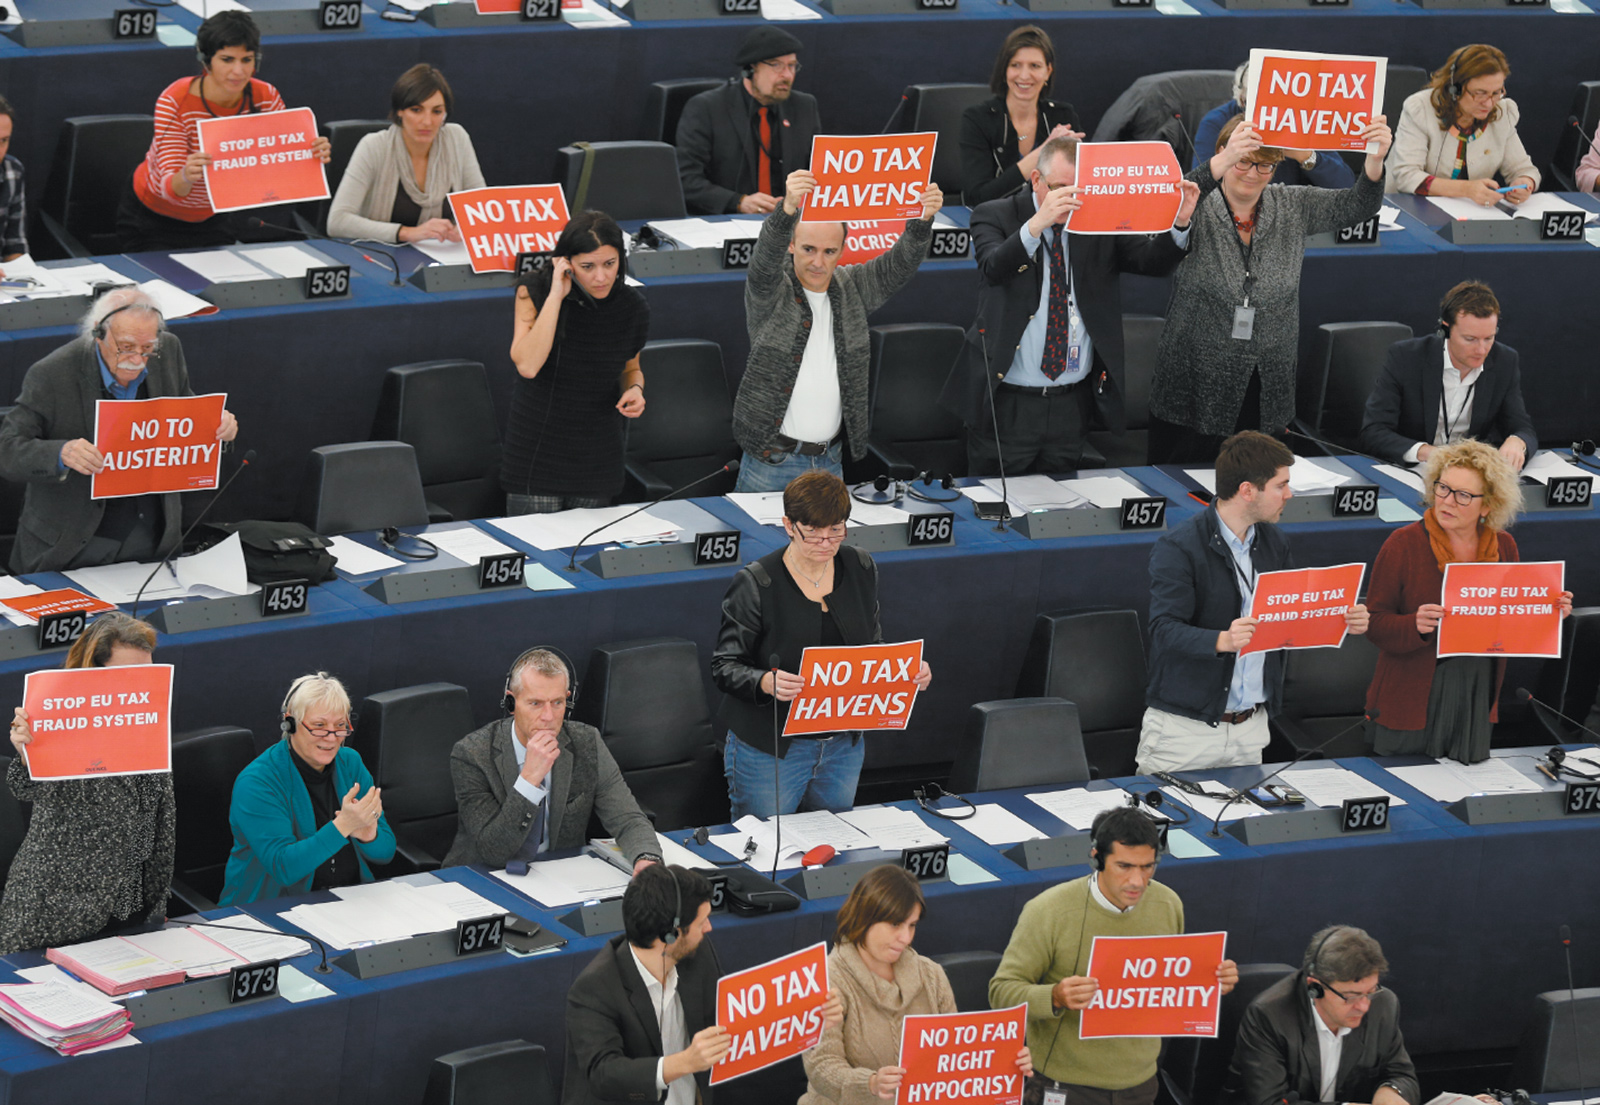 Members of the European Parliament in Strasbourg, France, holding signs in support of a motion to censure the European Commission under Jean-Claude Juncker because of the aggressive tax-avoidance policies pursued by Luxembourg while Juncker was prime minister, November 2014